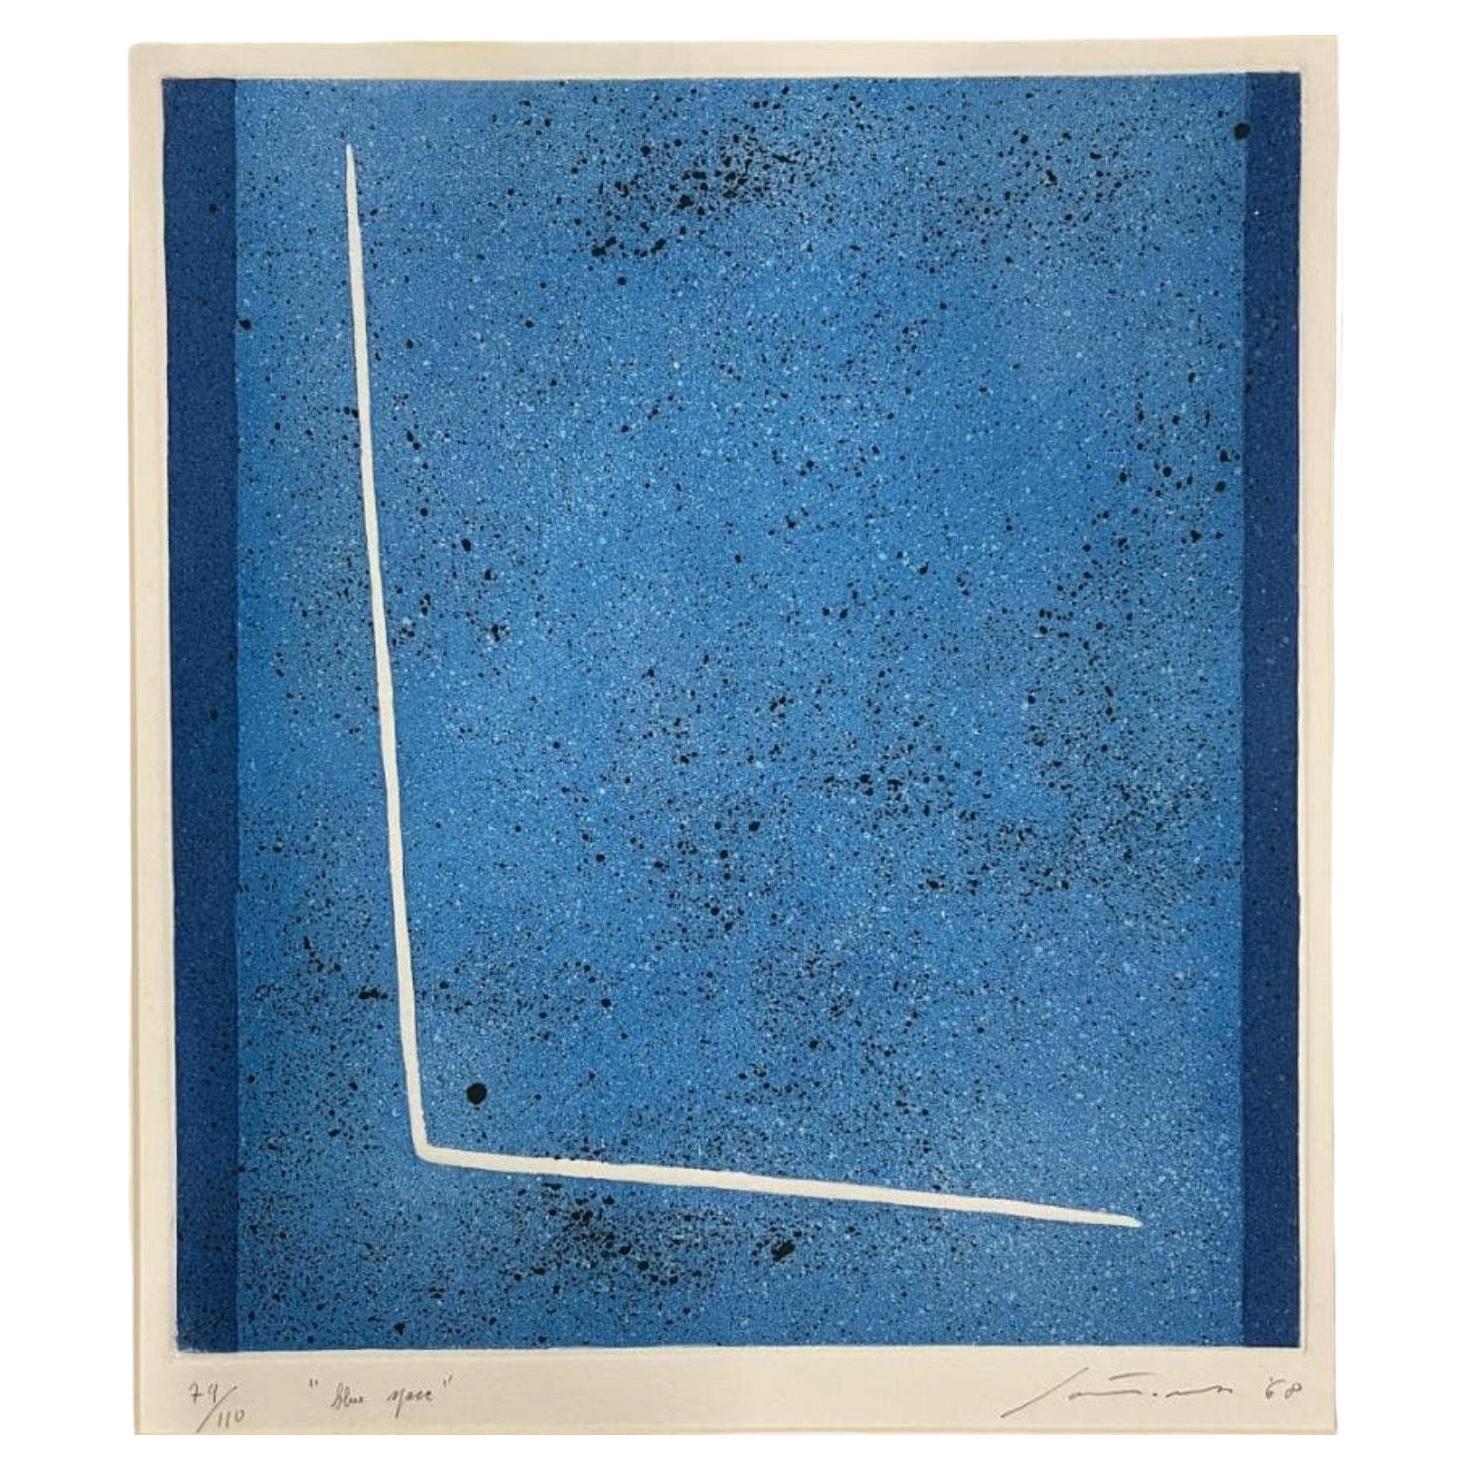 Guiseppe Santomaso (Italiener 1907 - 1990) Signierte Lithographie „Blue Space“, 1969.  im Angebot